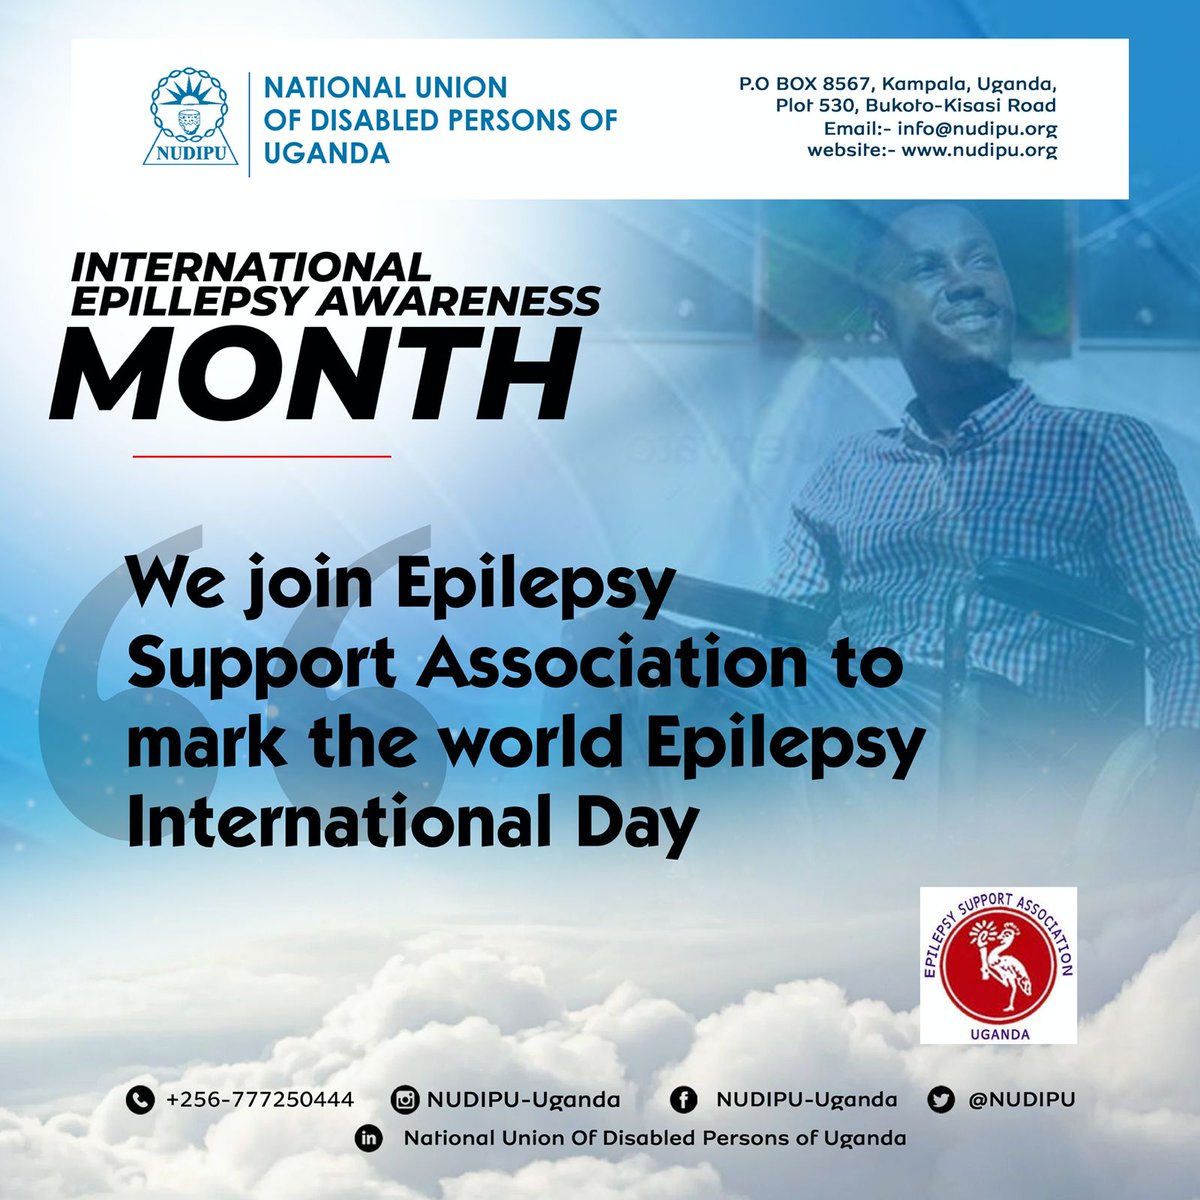 Epilepsy Awareness Month. Facts about epilepsy- @WHO ➡️Epilepsy is a chronic noncommunicable disease of the brain that affects people of all ages. About 50million people worldwide have epilepsy, making it one of the most common neurological diseases globally. @UgandaAwareness